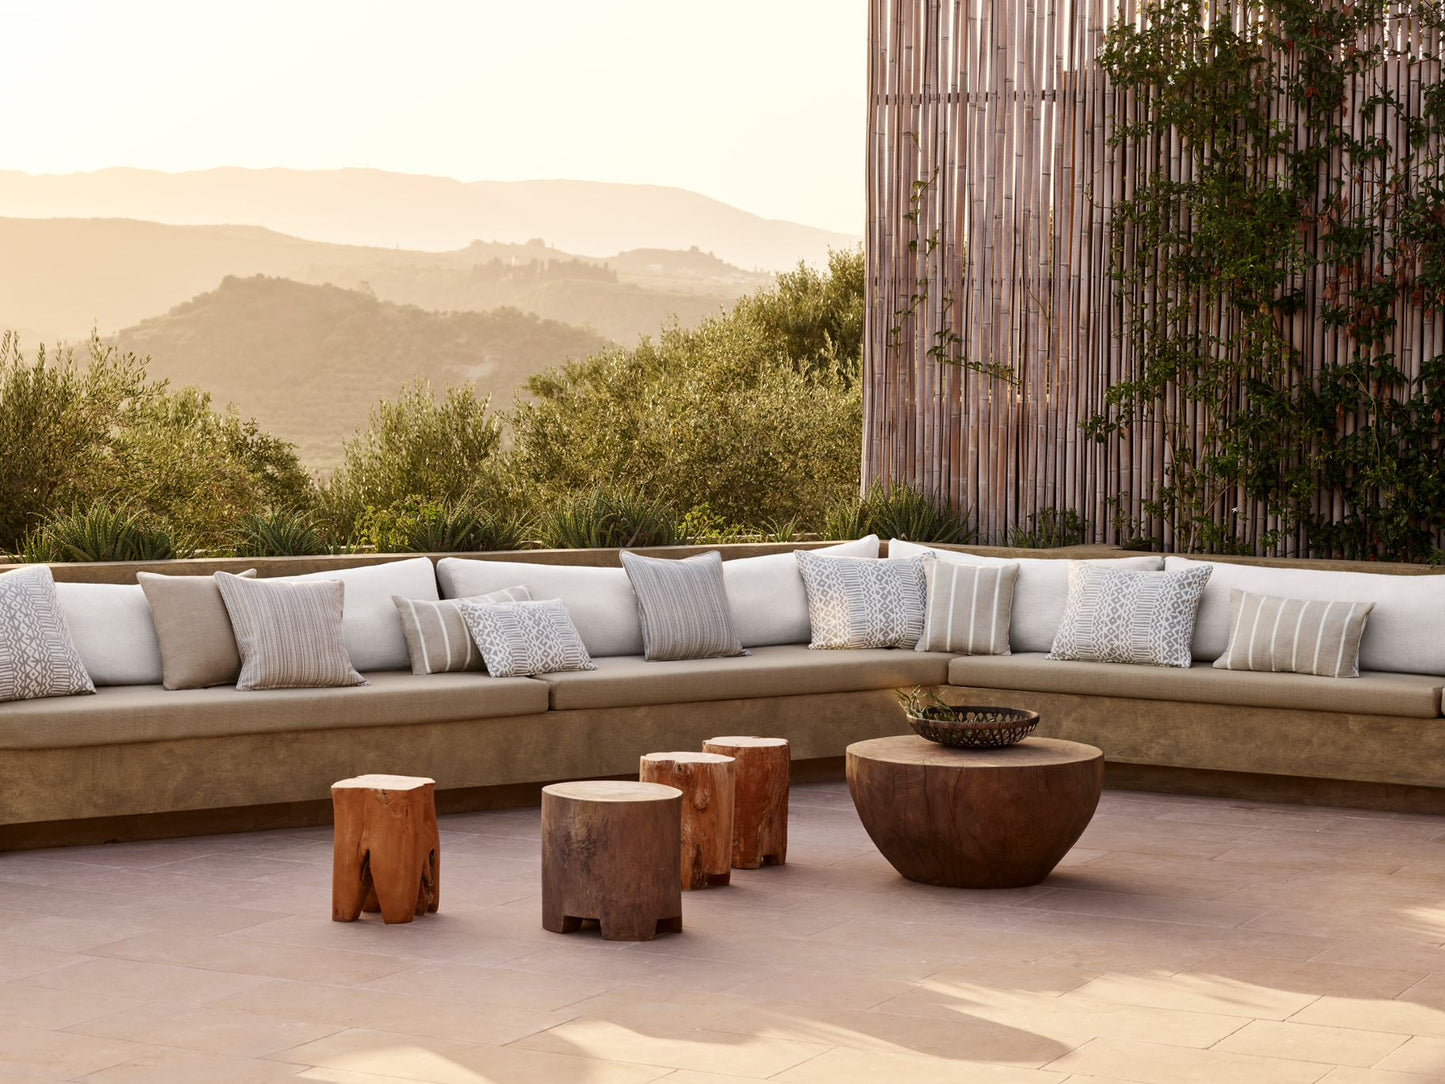 Outdoor Ticking Cushions